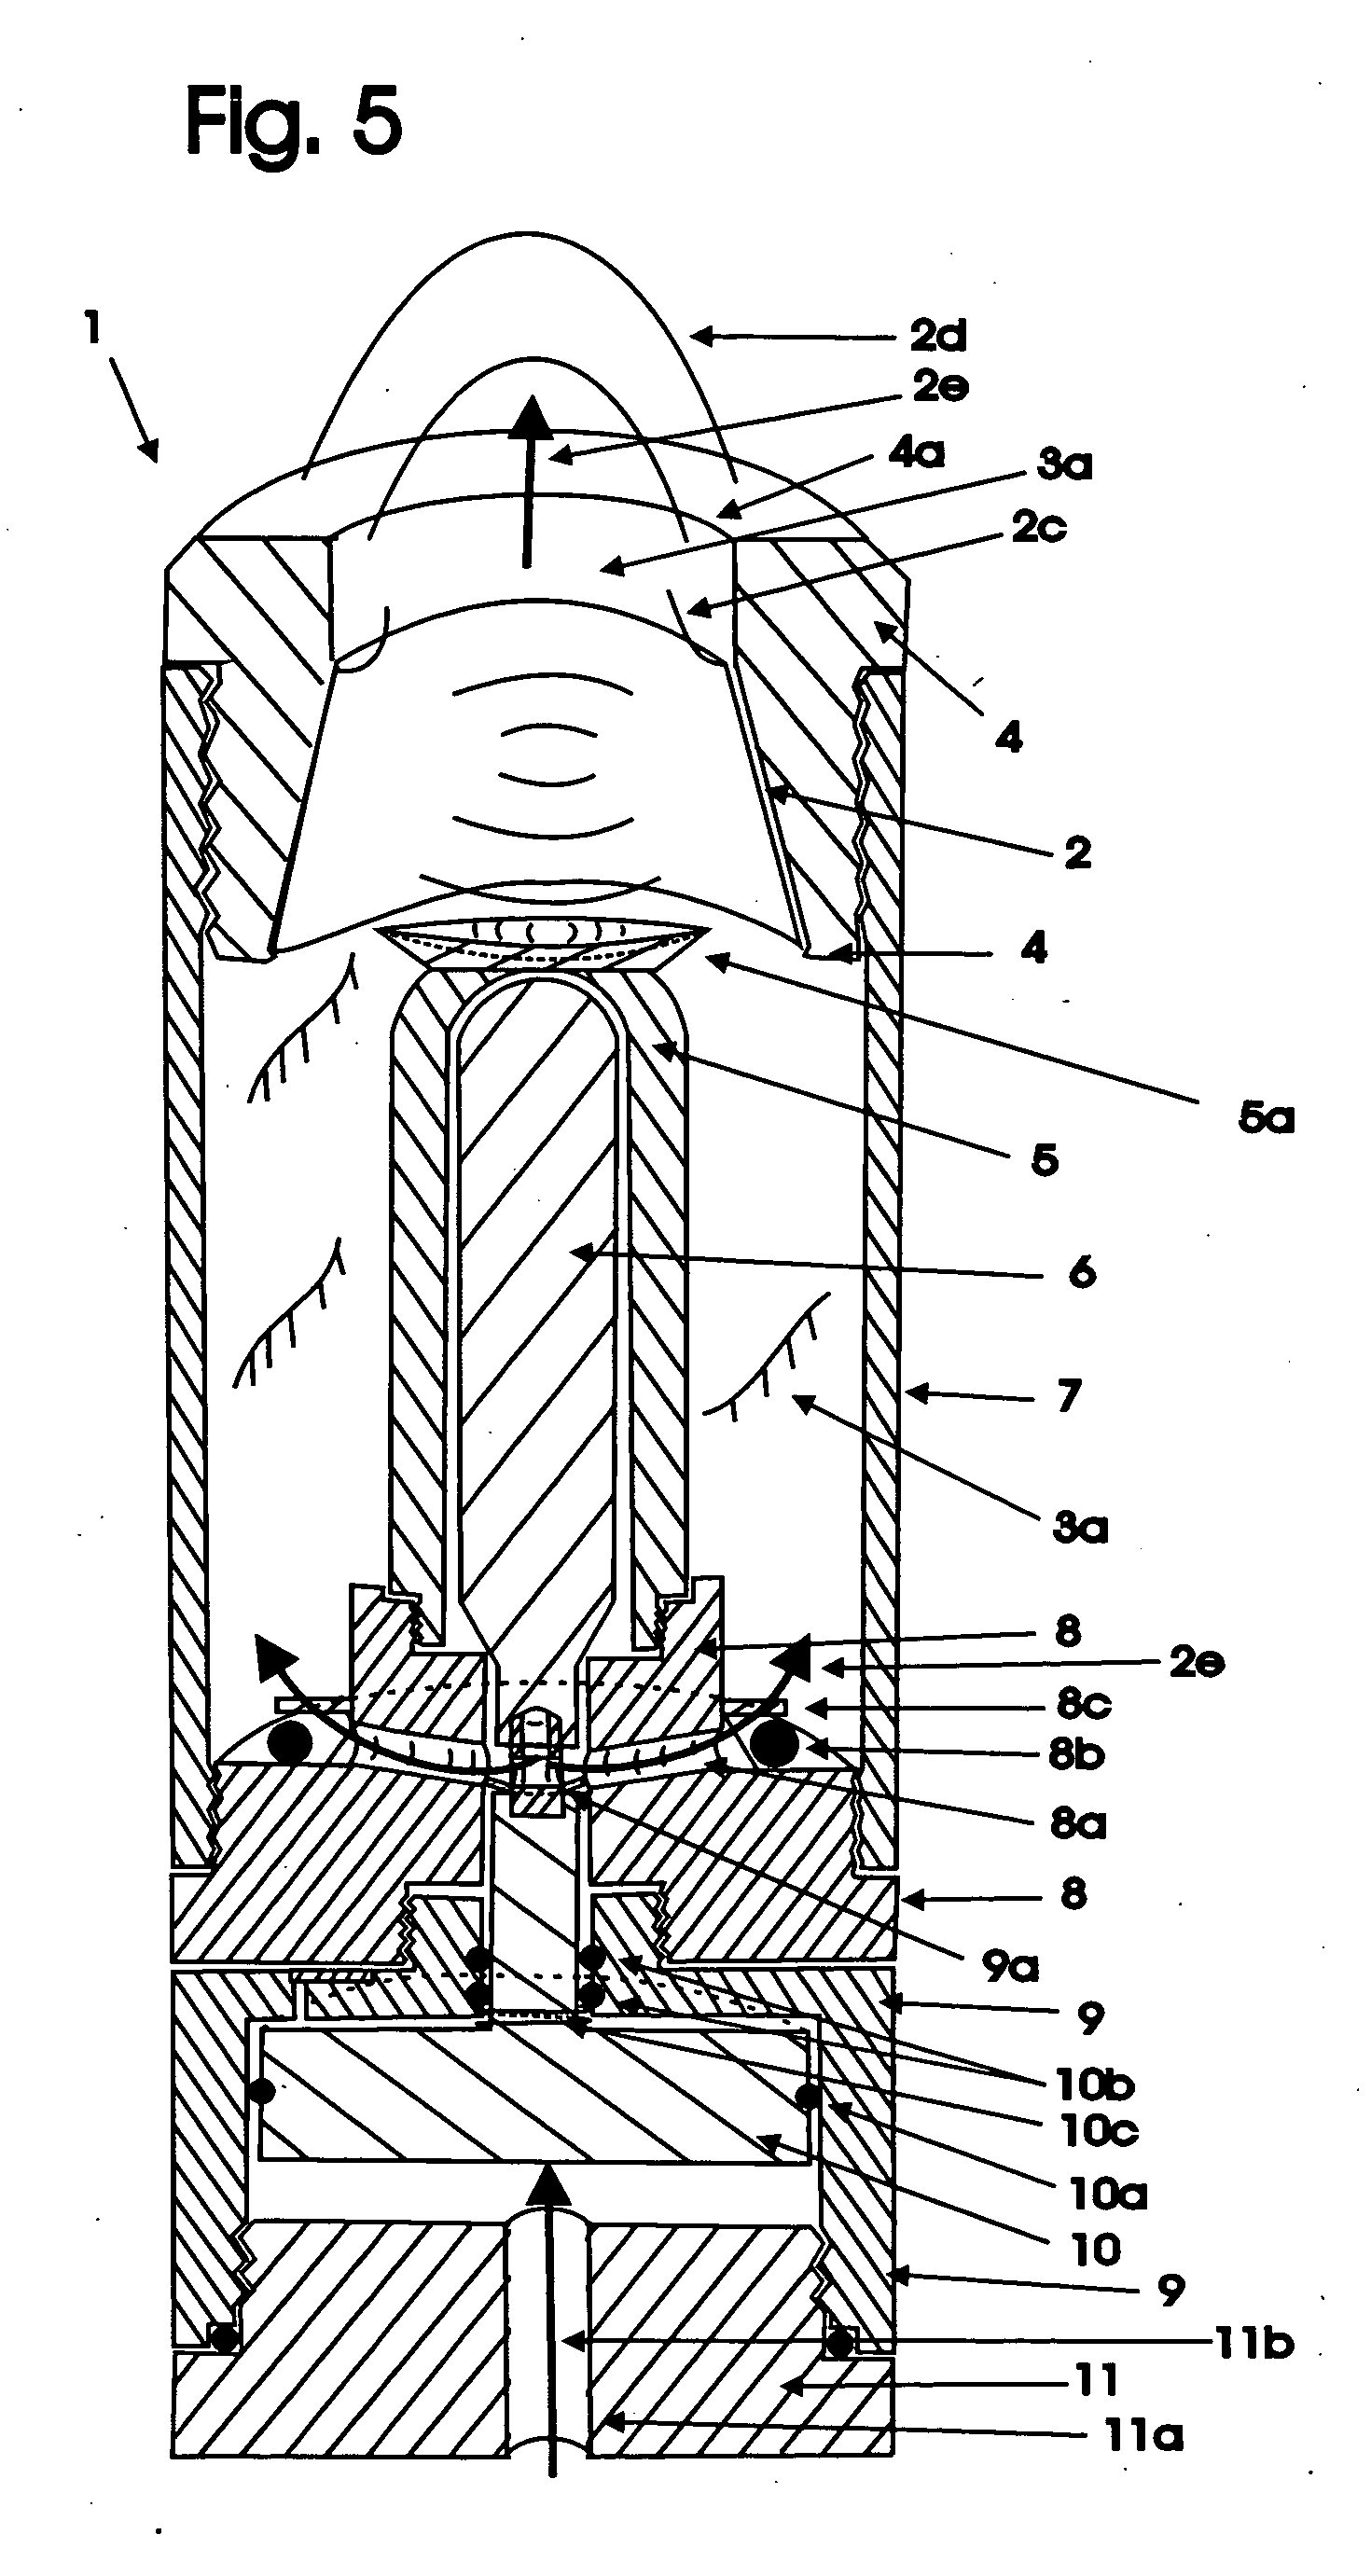 Gas projection device sometimes with a burst disk, producing loud sonic report and smoke plume